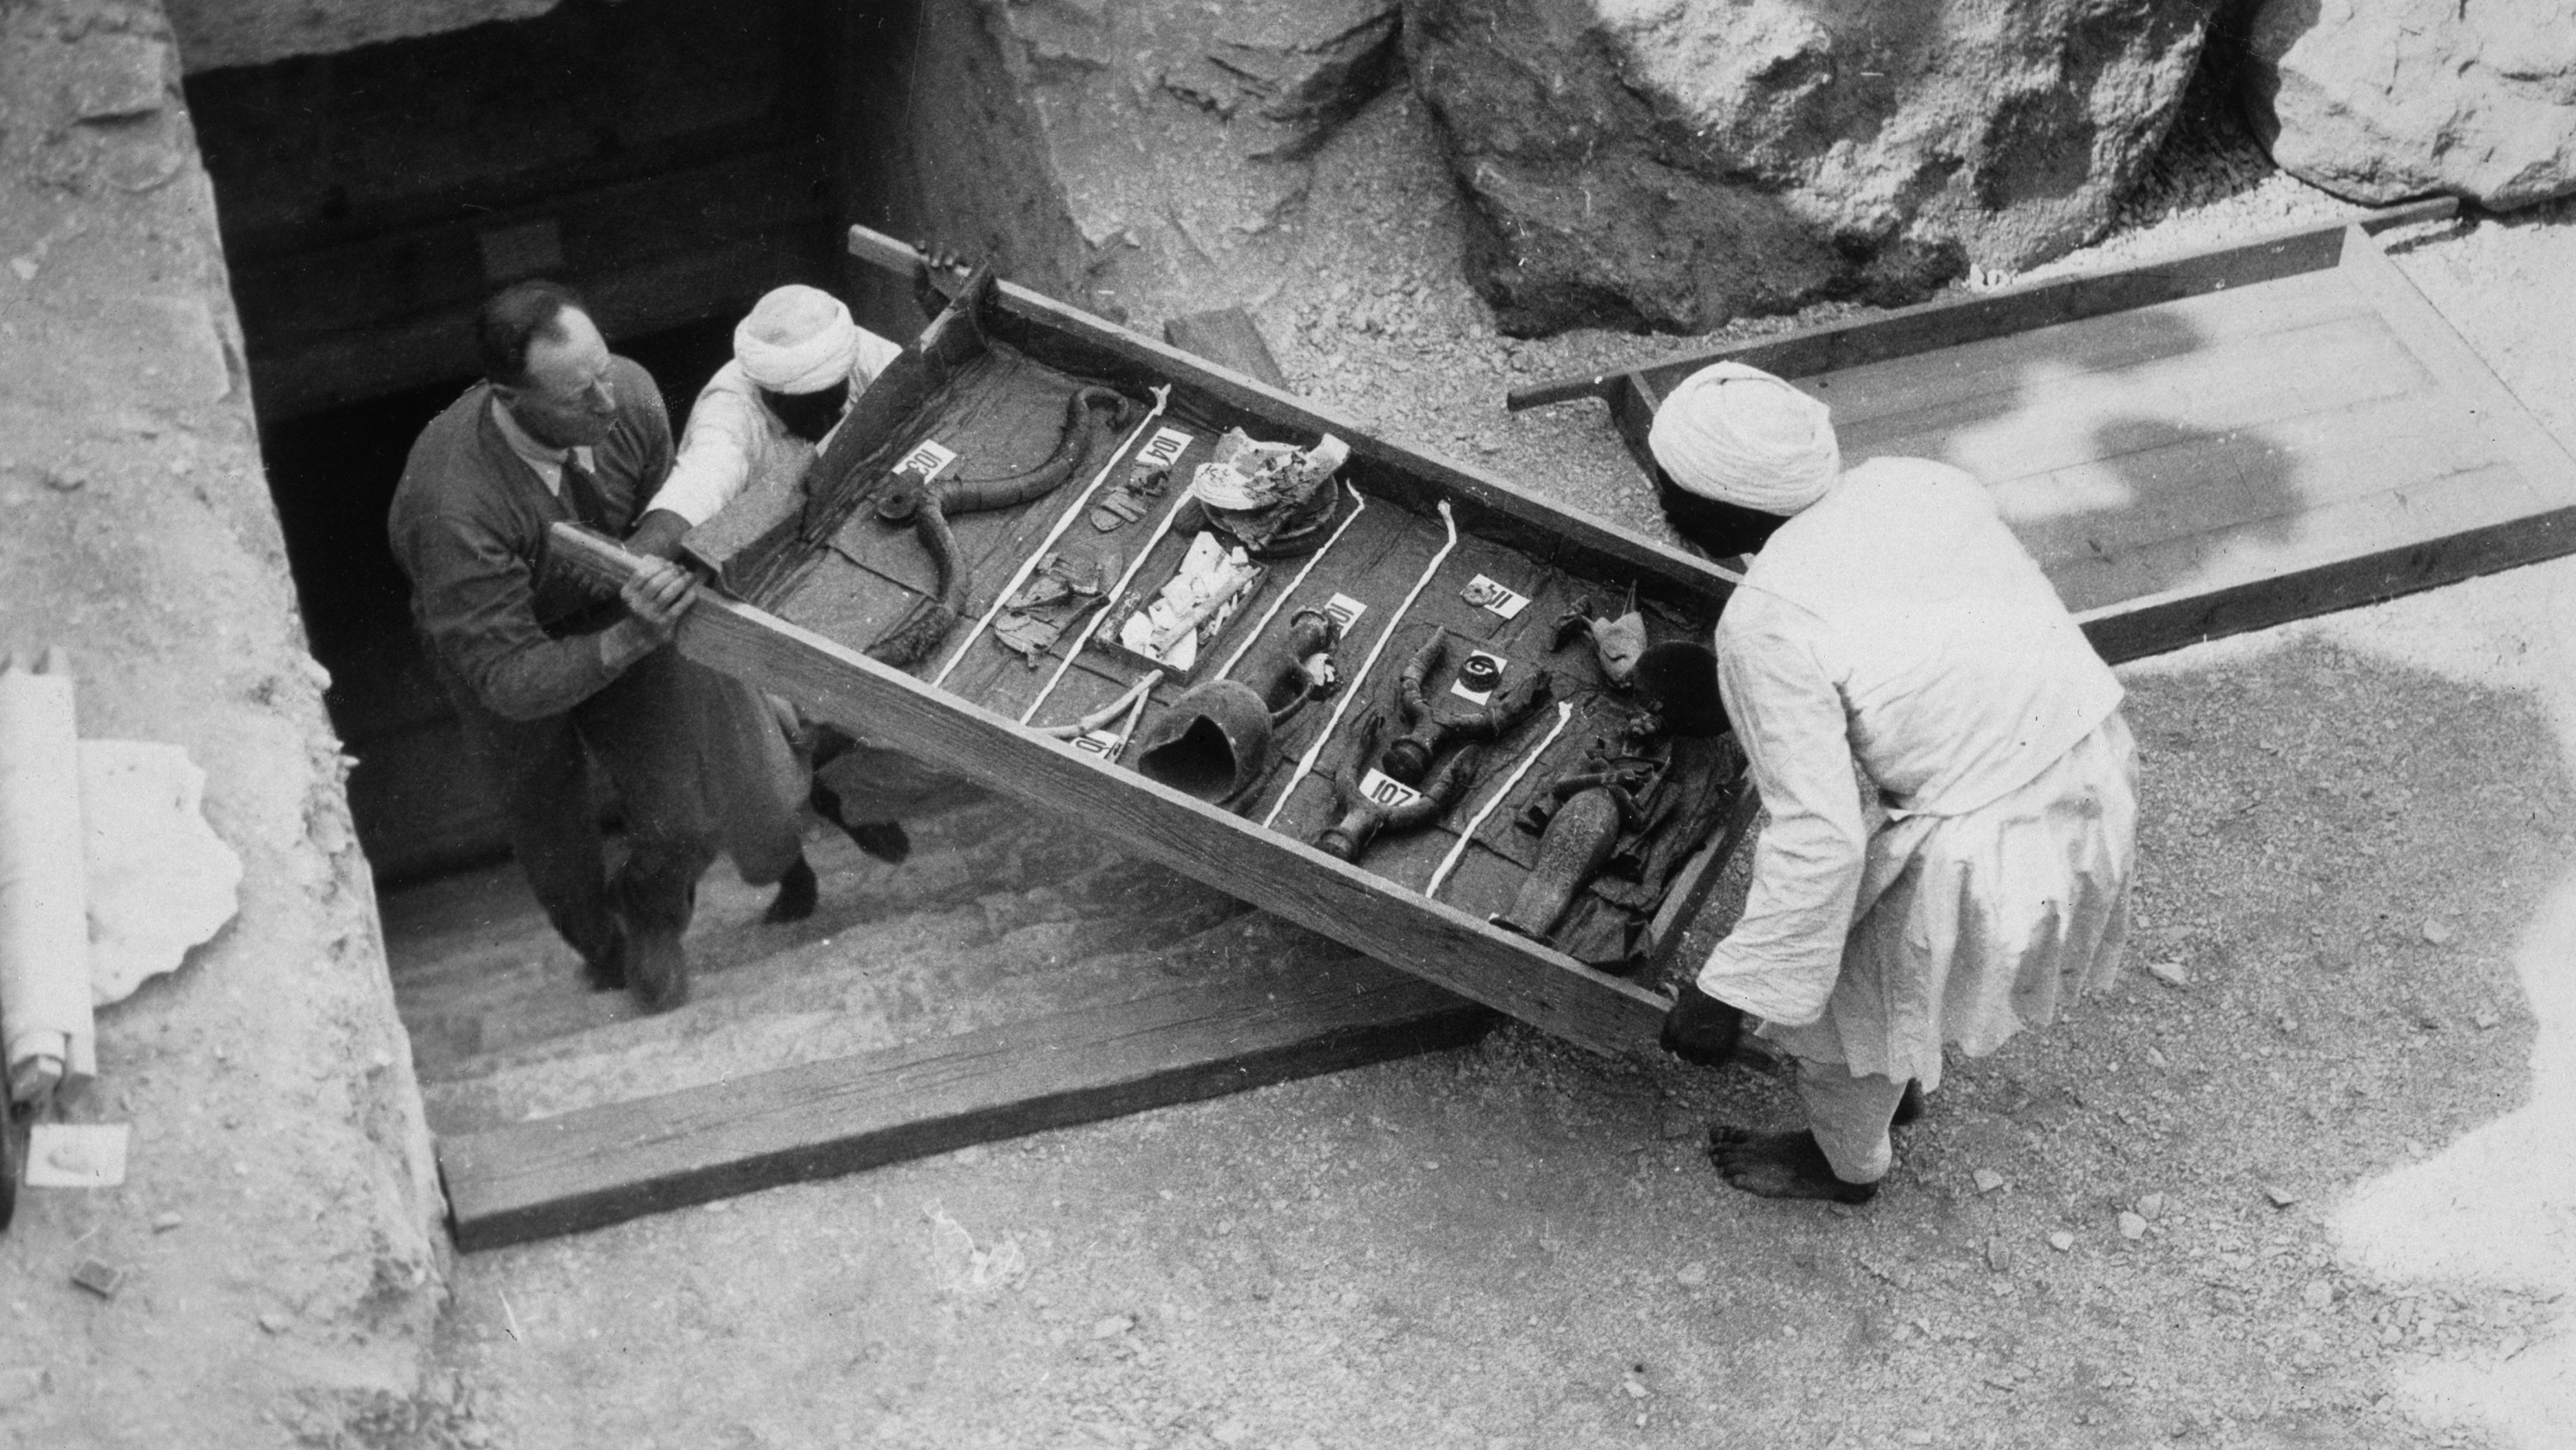 Removing A Tray Of Chariot Parts From The Tomb Of Tutankhamun Valley Of The Kings Egypt 1922